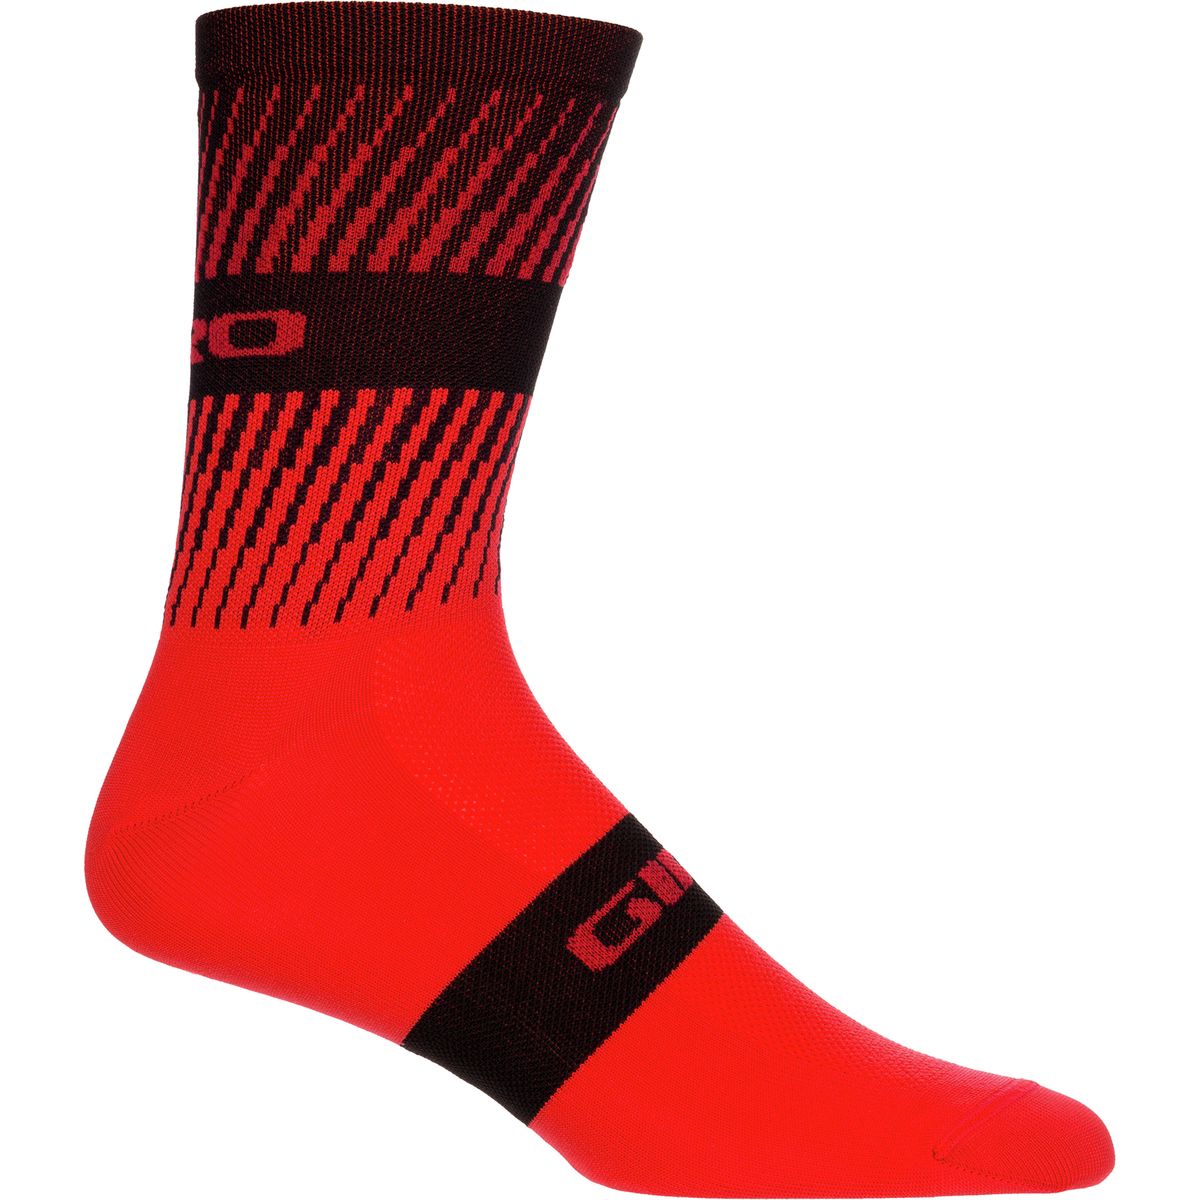 Giro Comp Racer High Rise Limited Edition Sock Men's